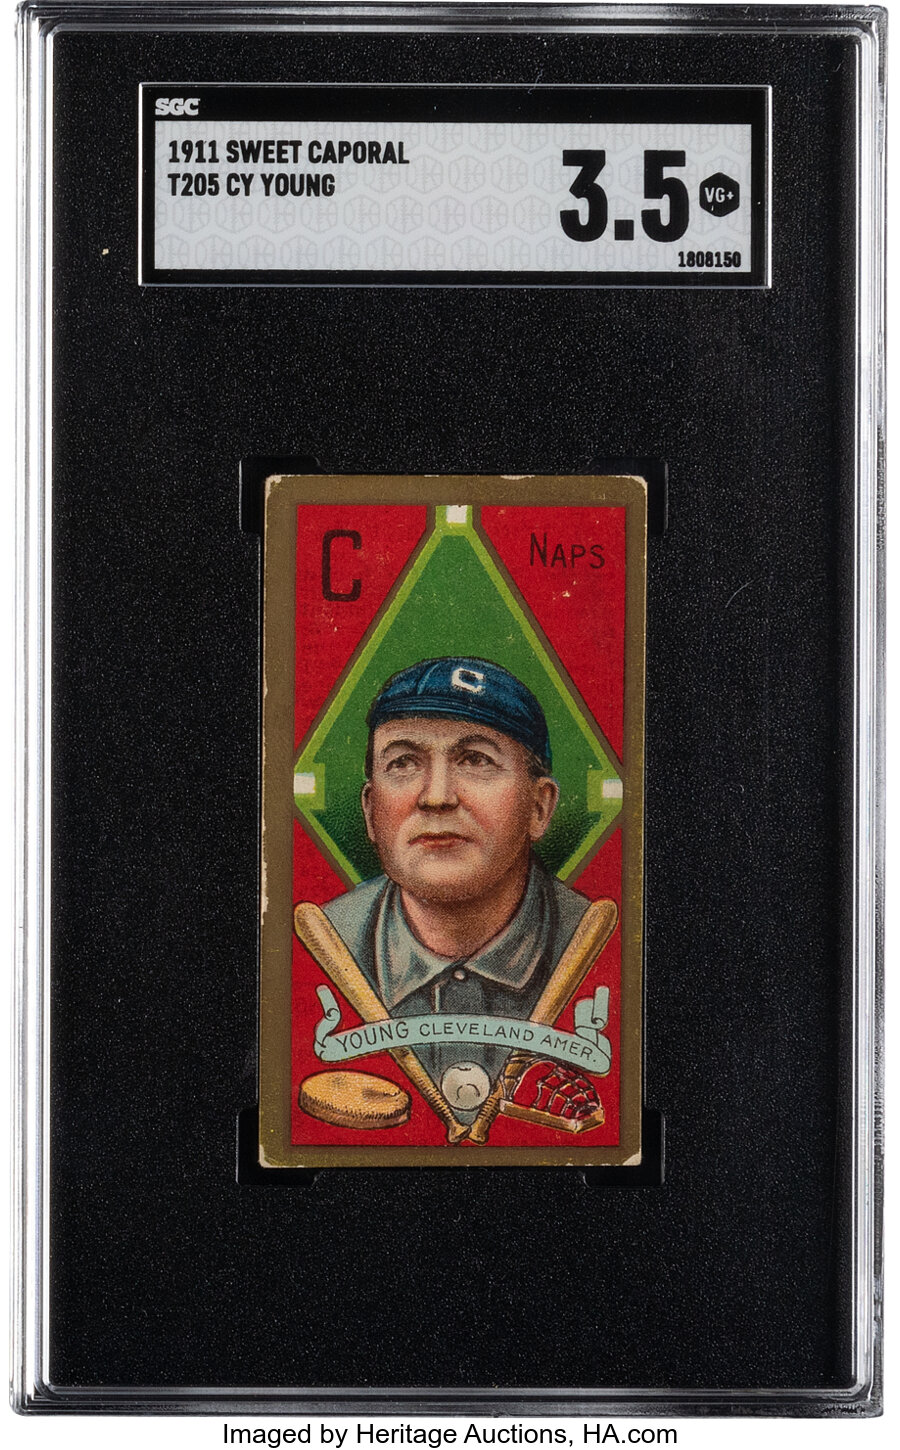 1911 T205 Sweet Caporal Cy Young SGC VG+ 3.5